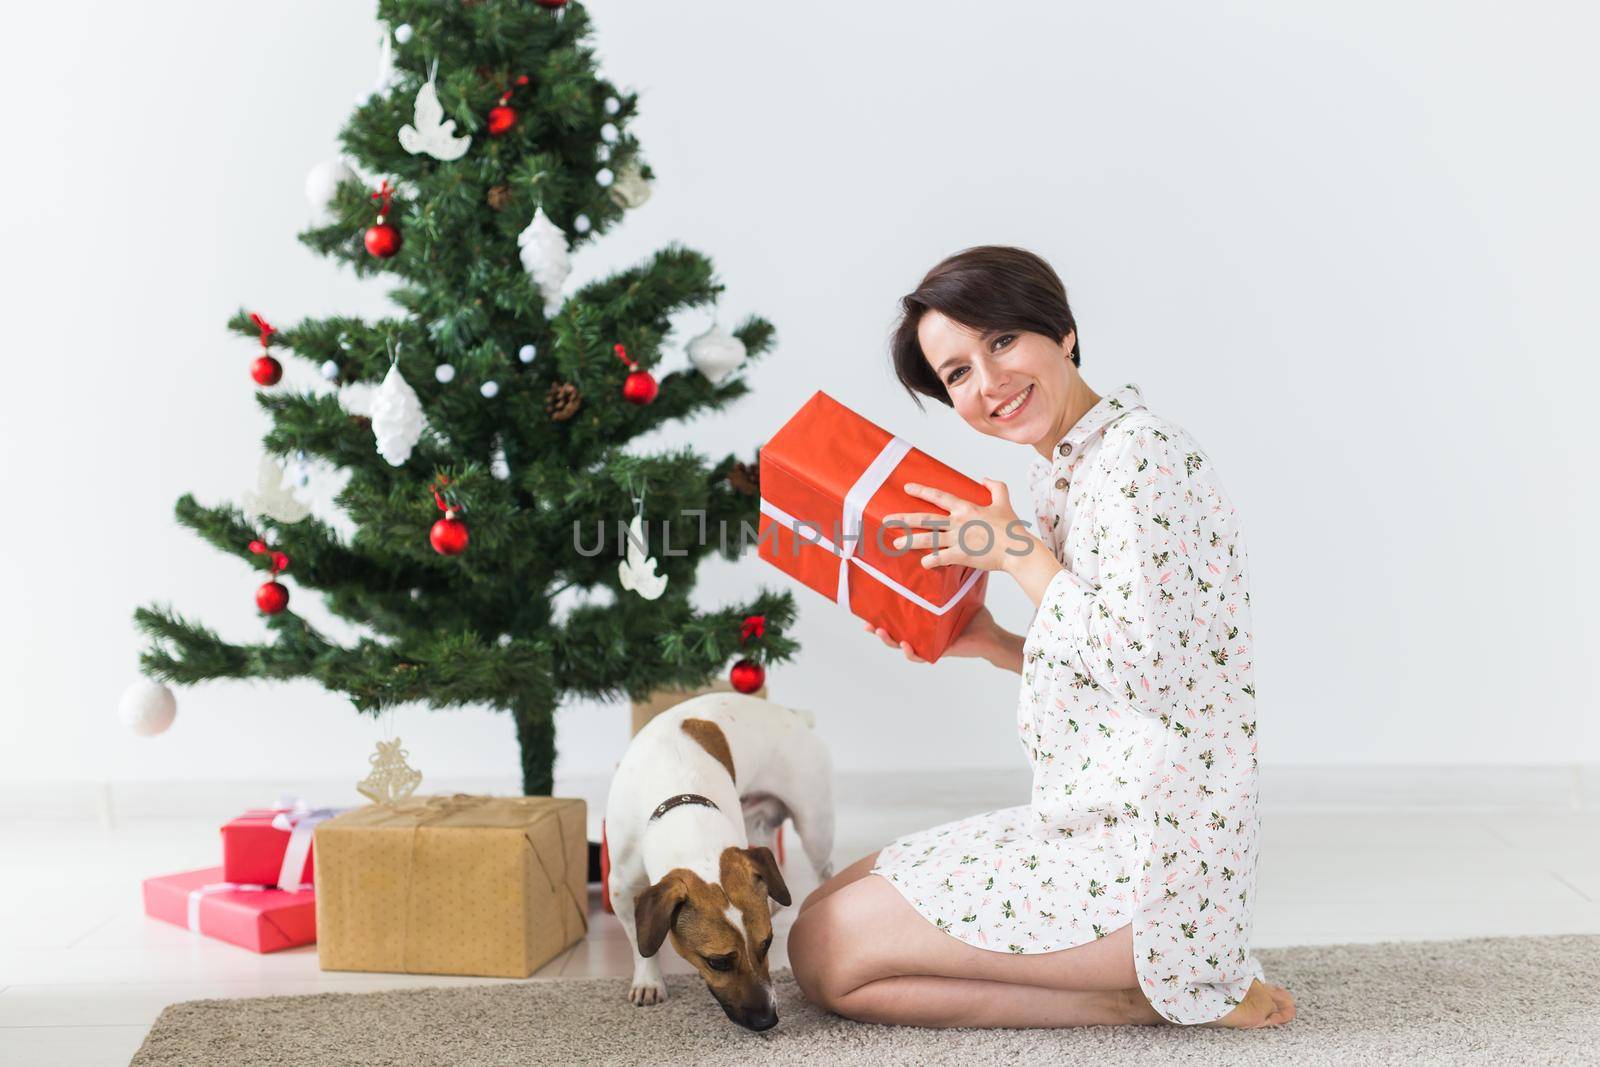 Happy woman with dog opening Christmas gifts. Christmas tree with presents under it. Decorated living room by Satura86